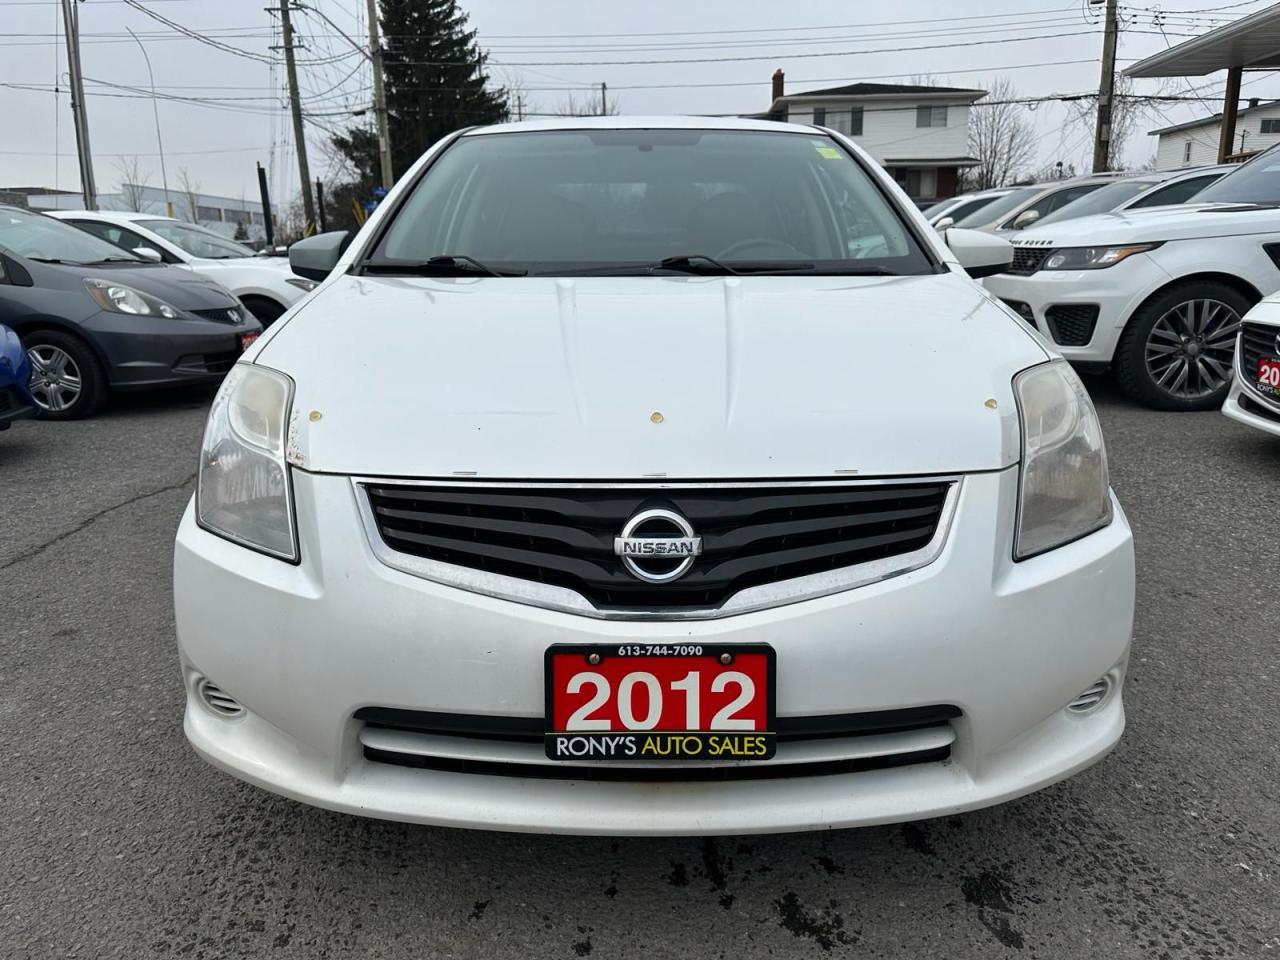 2012 Nissan Sentra AUTOMATIC, ACCIDENT FREE, A/C, POWER GROUP, 144 KM - Photo #2